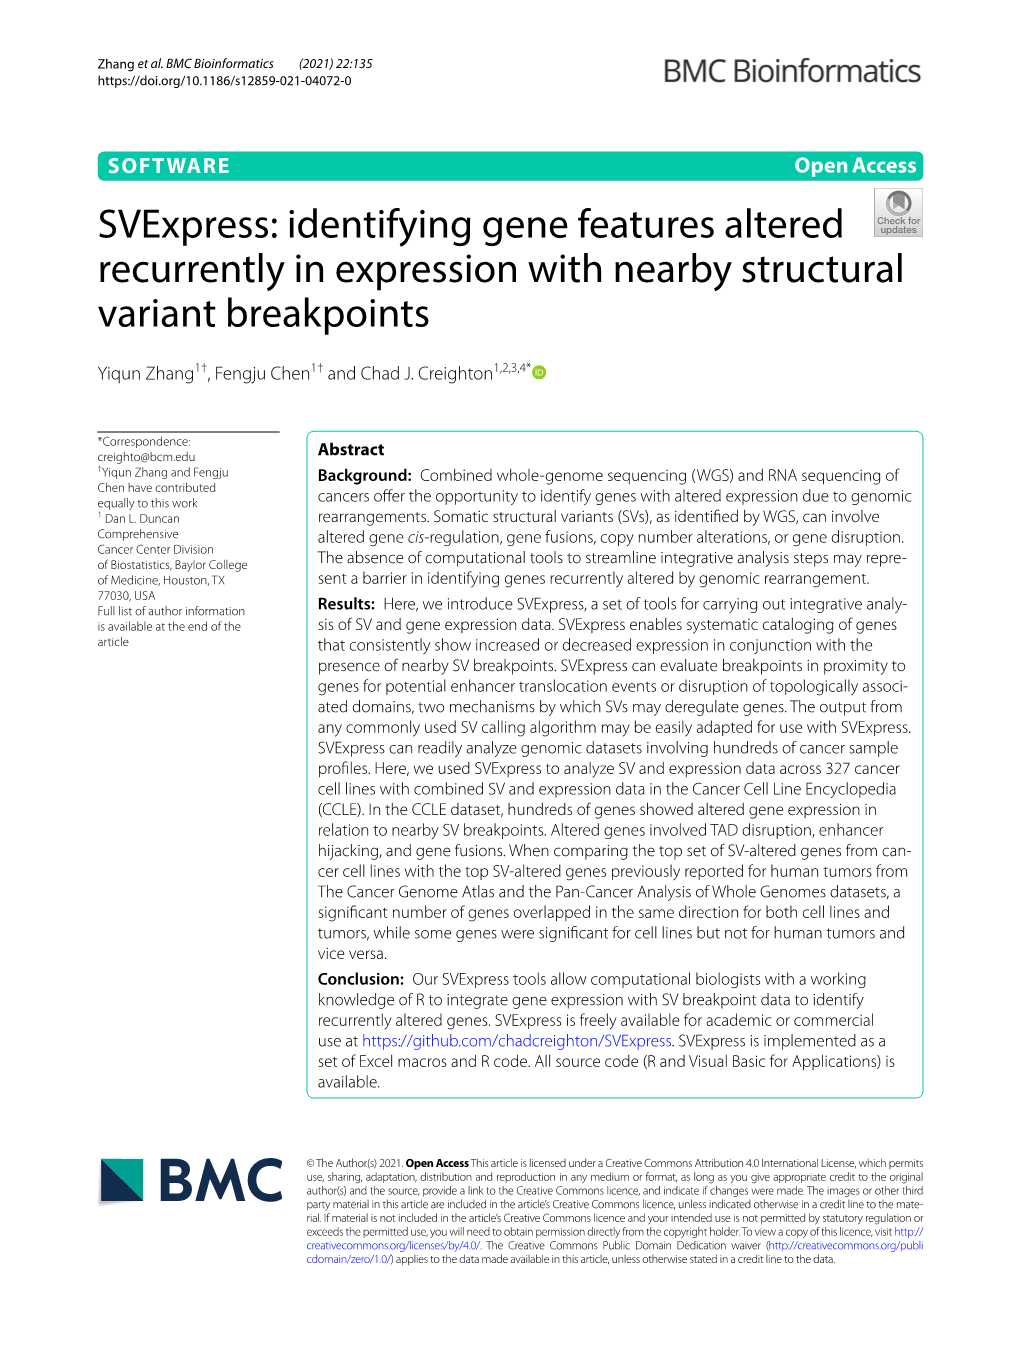 Svexpress: Identifying Gene Features Altered Recurrently in Expression with Nearby Structural Variant Breakpoints